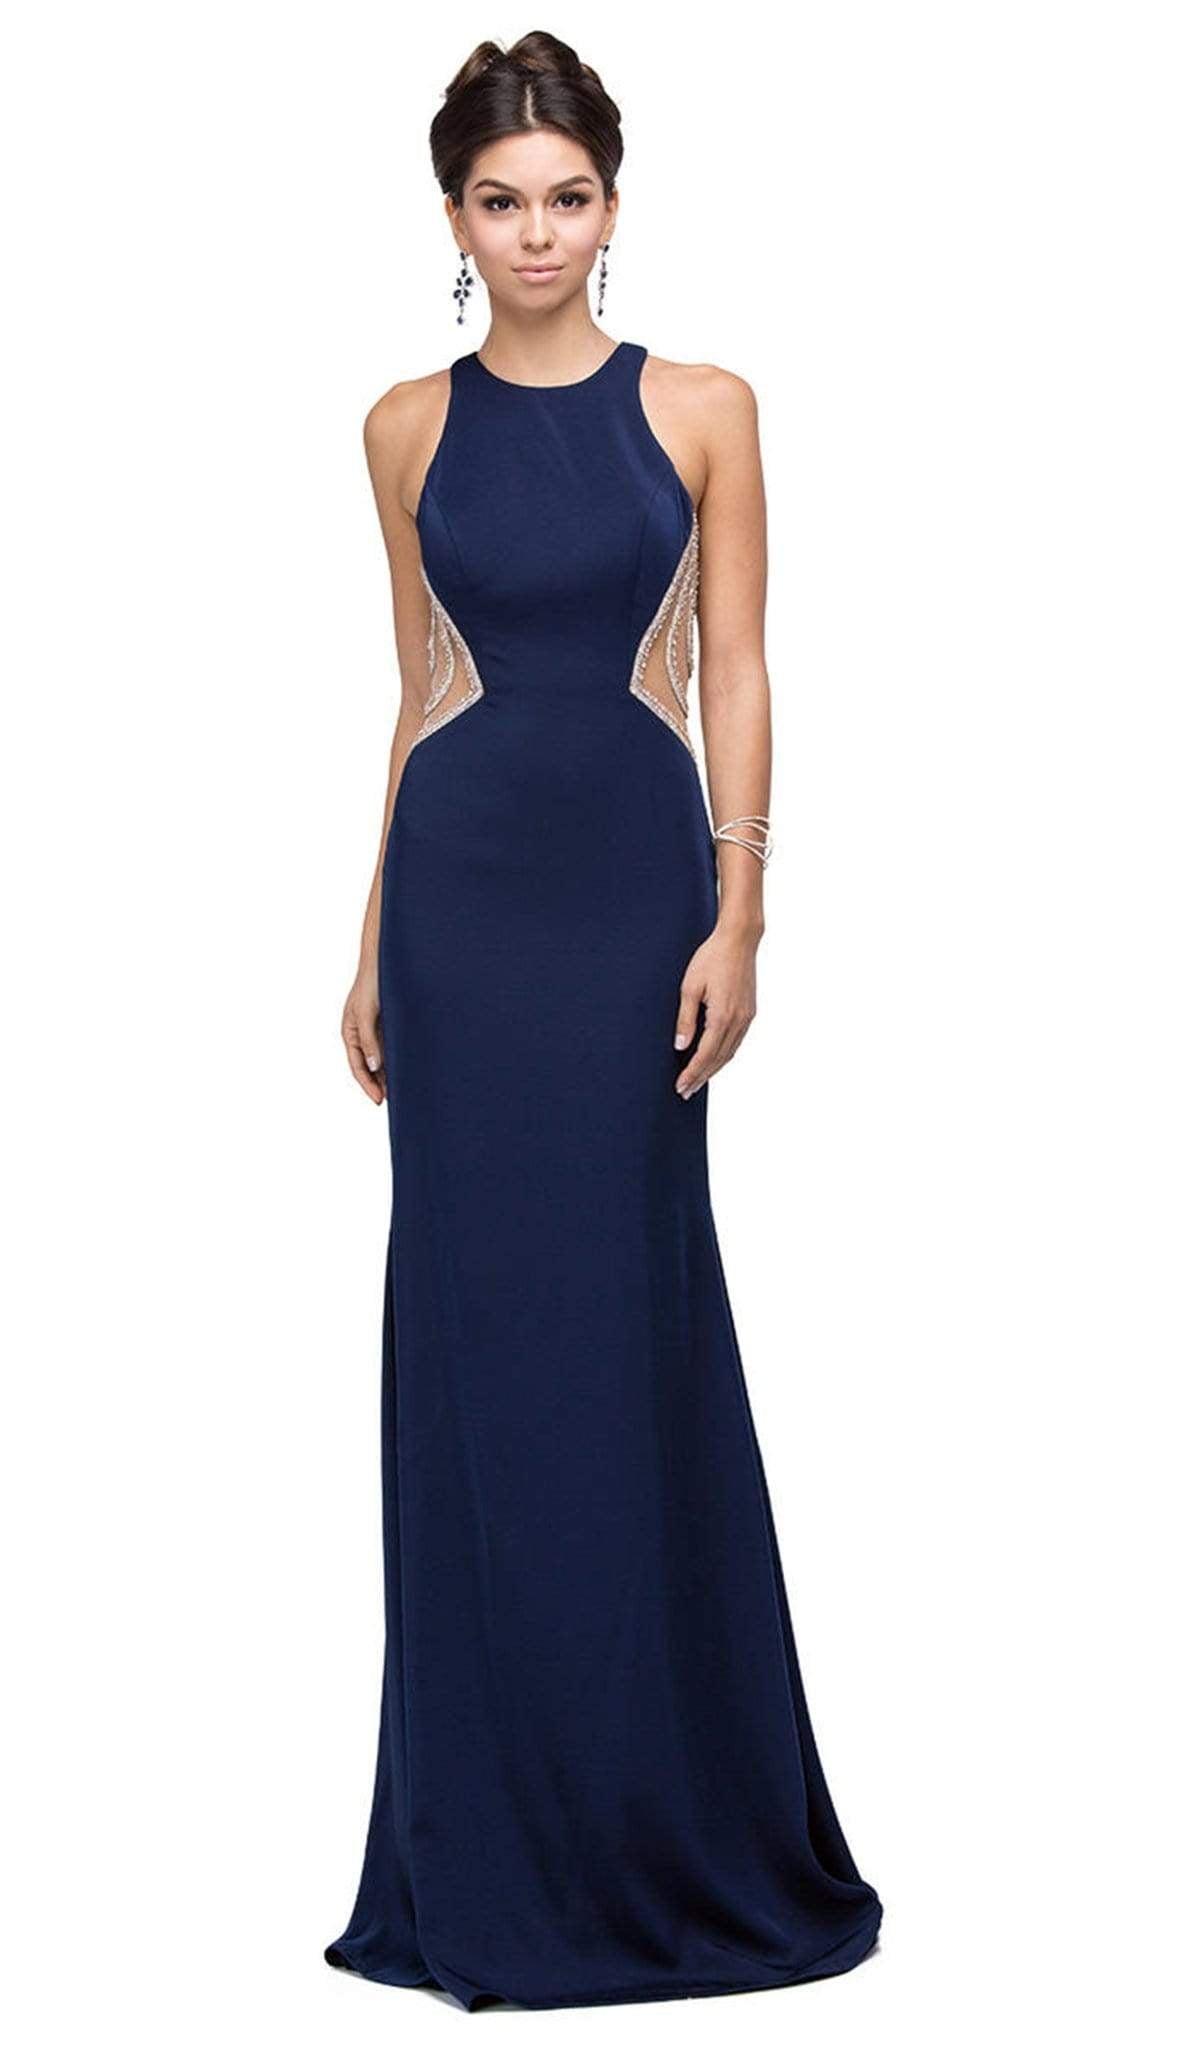 Dancing Queen - 9746 Jewel Fitted Sheath Prom Dress
